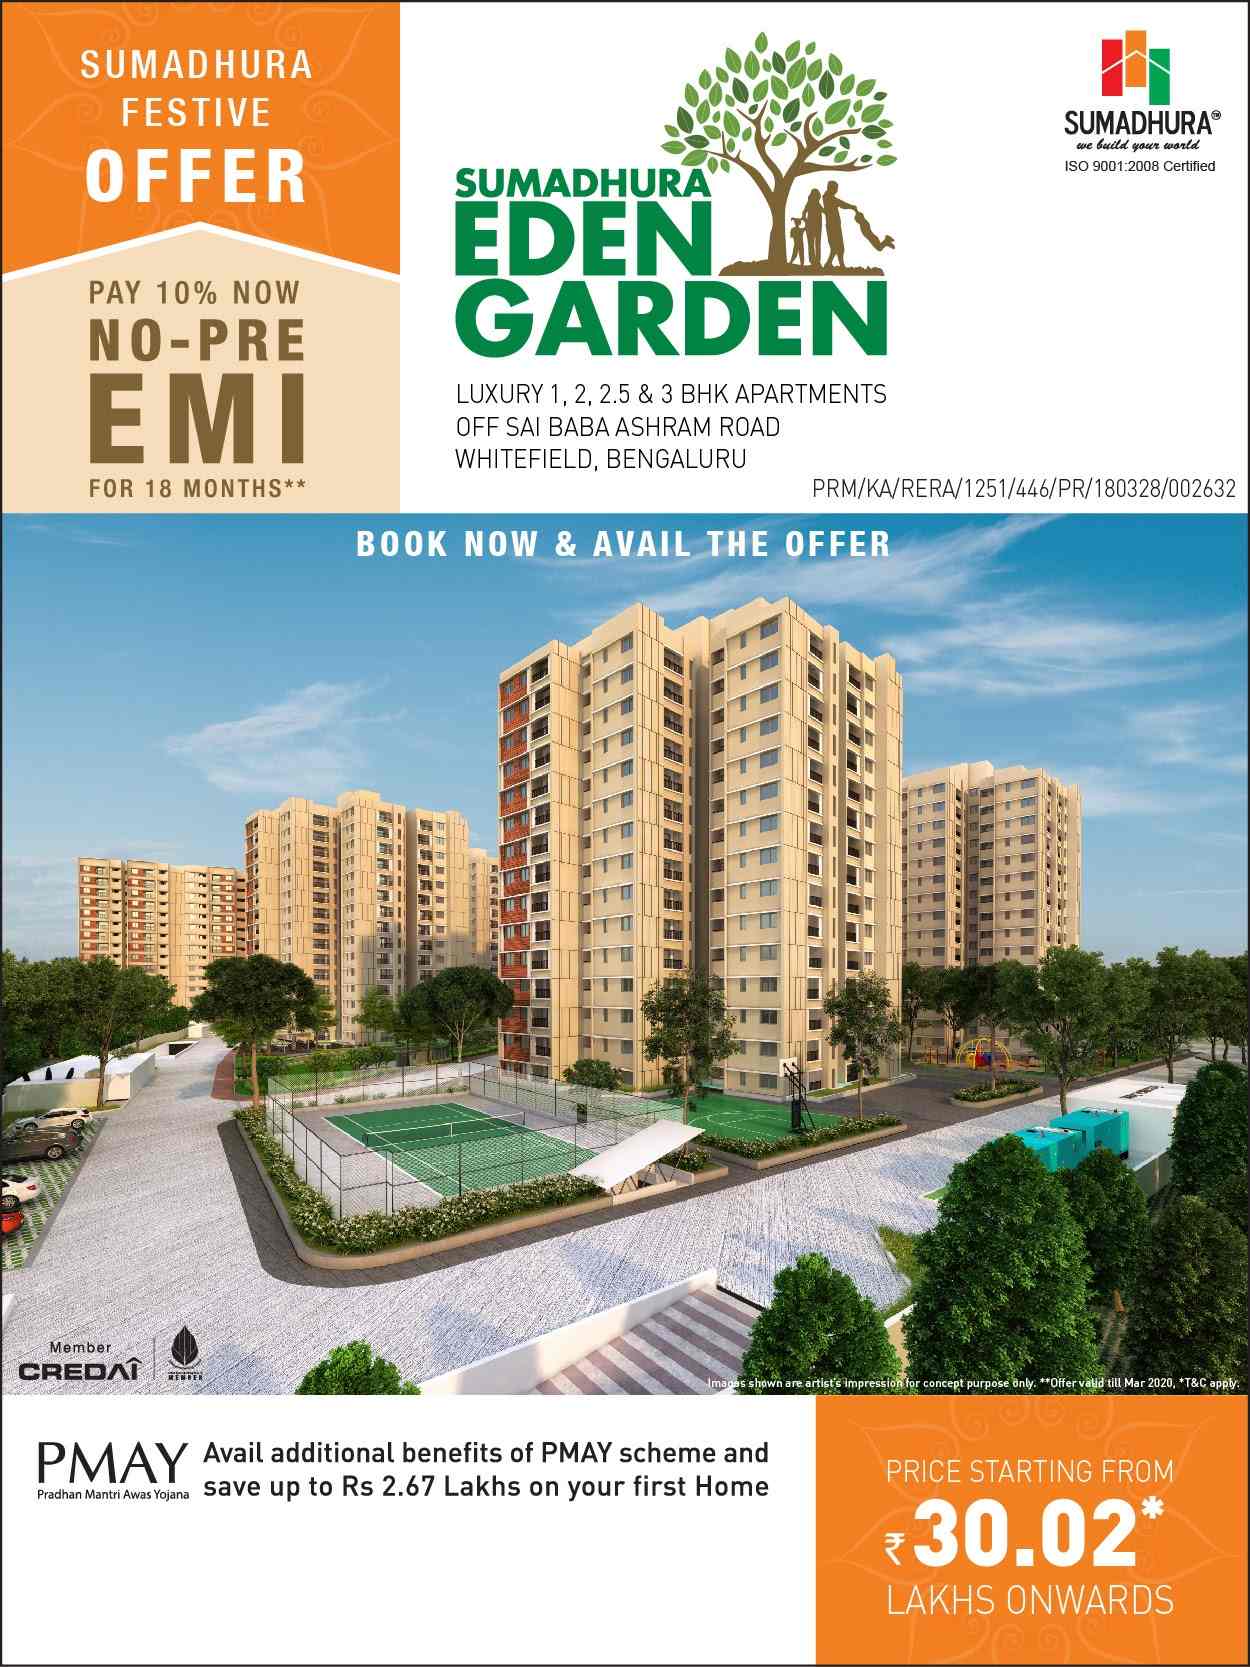 Pay 10% now and no pre-EMI for 18 months at Sumadhura Eden Garden in Bangalore